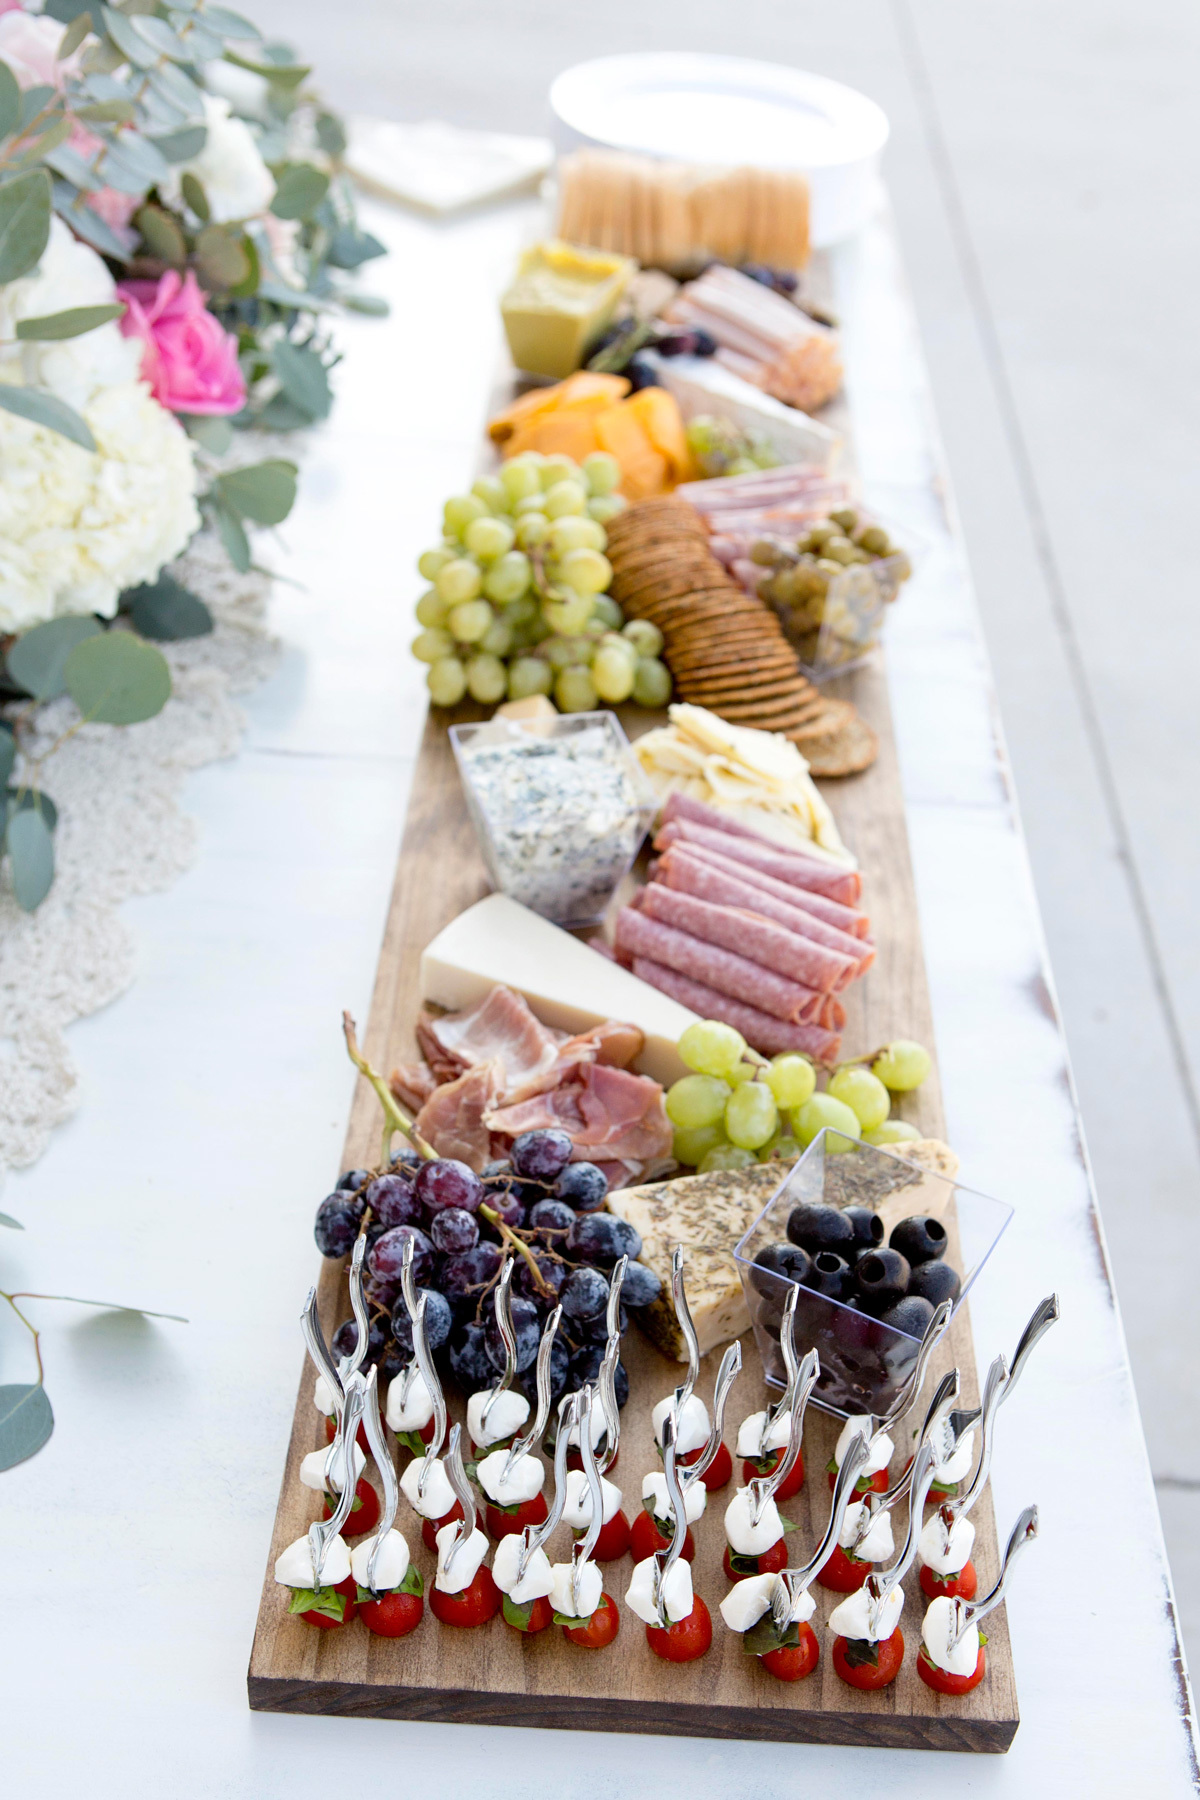 How to Make a Wedding Charcuterie Board, According to Experts